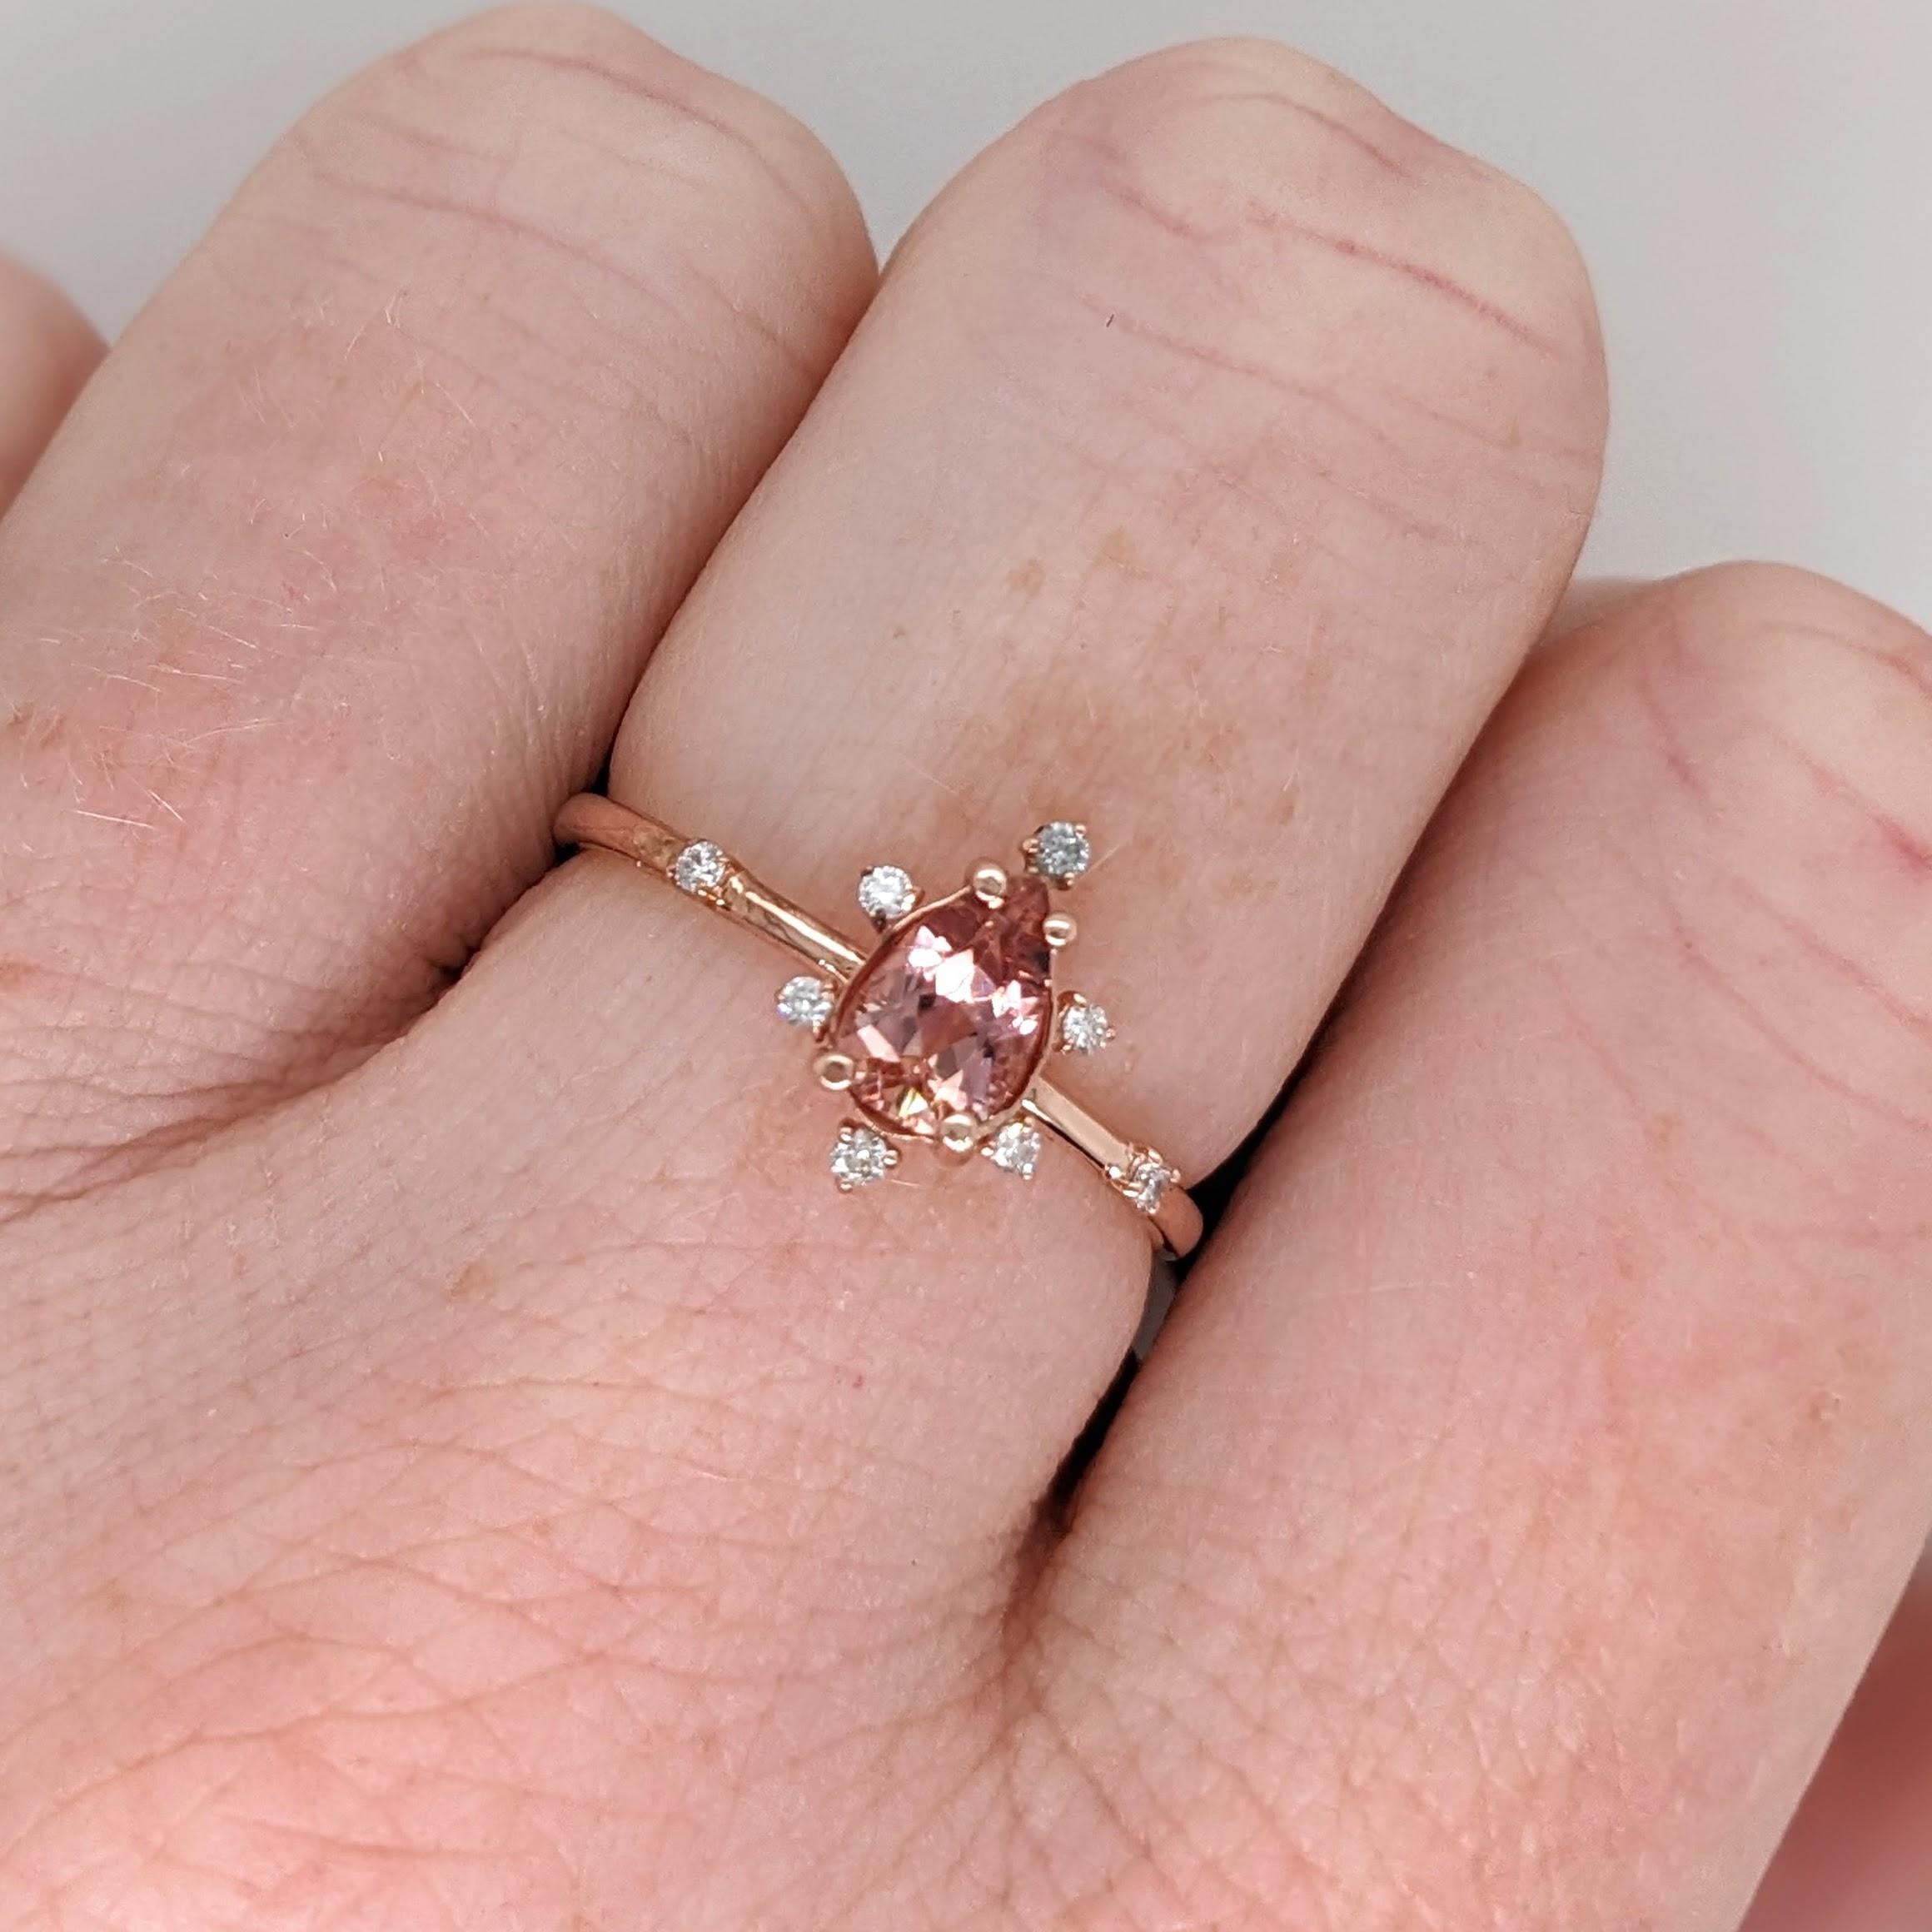 This ring features a pink Imperial Topaz in solid 14K Gold and natural earth-mined diamonds. A cute and dainty piece for that person you love! 

Specifications

Item Type: Ring
Centre Stone: Imperial Topaz
Treatment: Heated
Weight: 0.69ct
Head